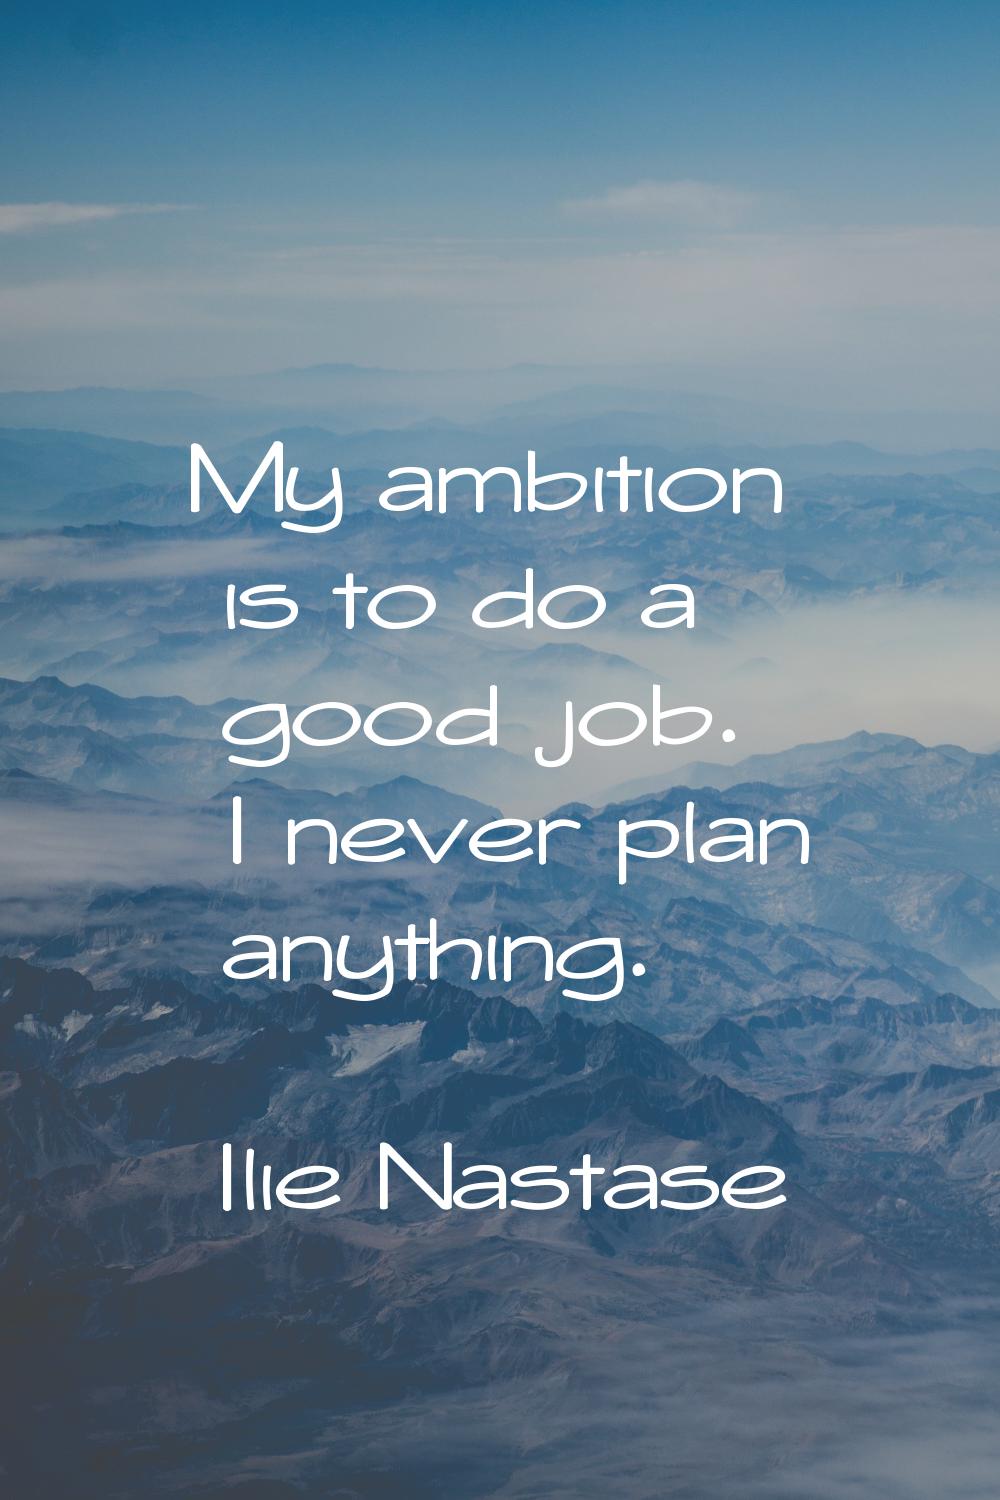 My ambition is to do a good job. I never plan anything.